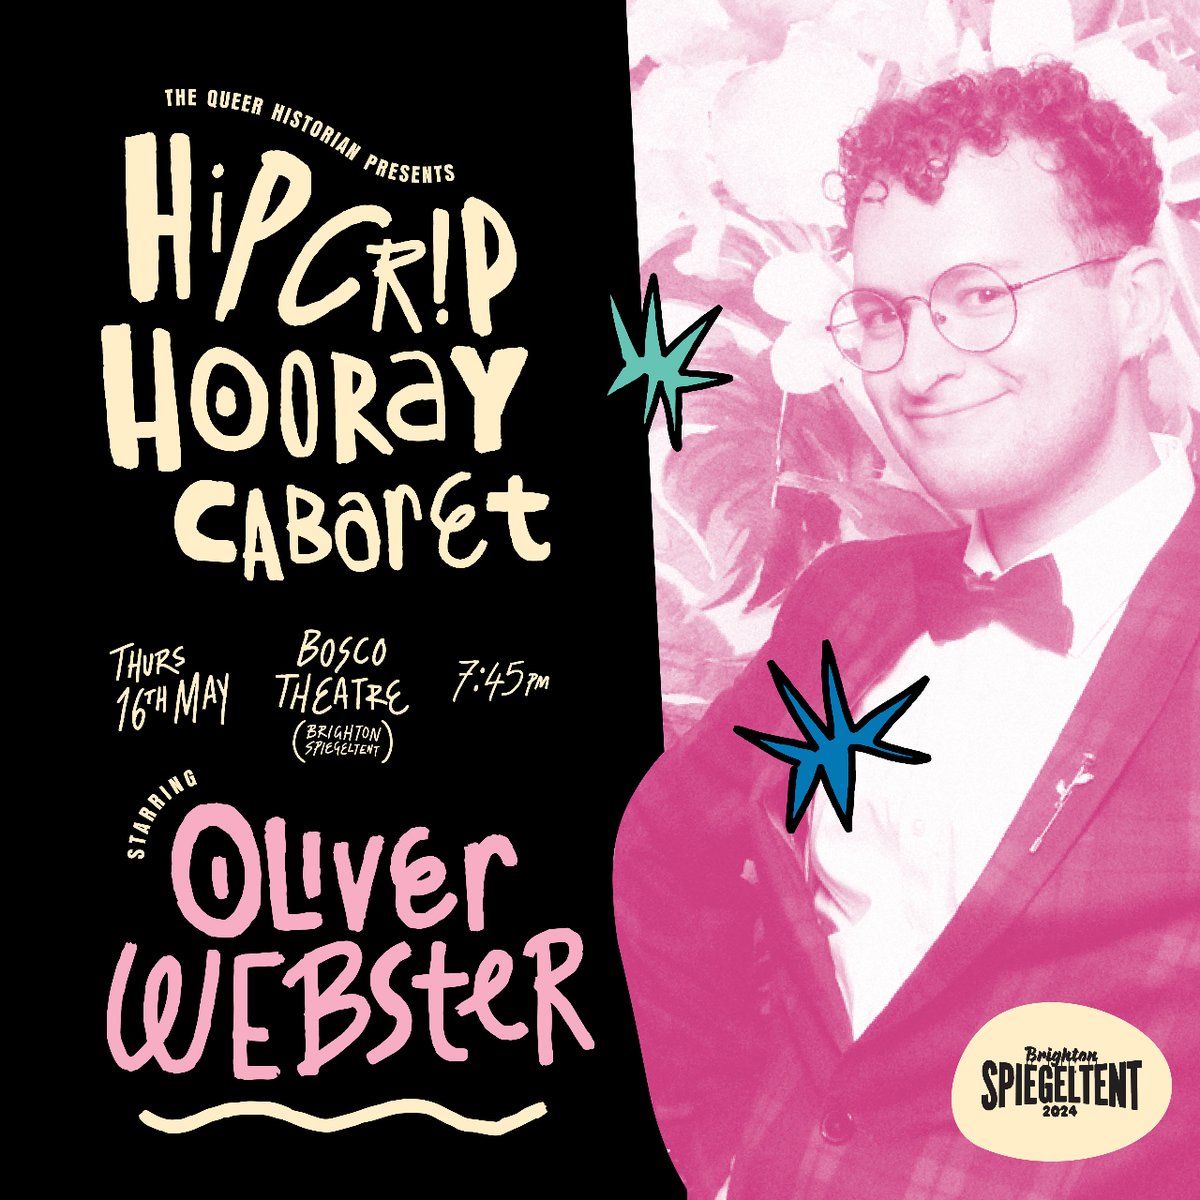 ⭐ MEET THE CAST: OLIVER WEBSTER ⭐ #HipCripHooray  Oliver is just some guy, but also a deaf, queer, attention seeker, with entirely good reason. Dedicated to having a good time and talking about himself, spend five minutes with him and you’ll know more about his life /1